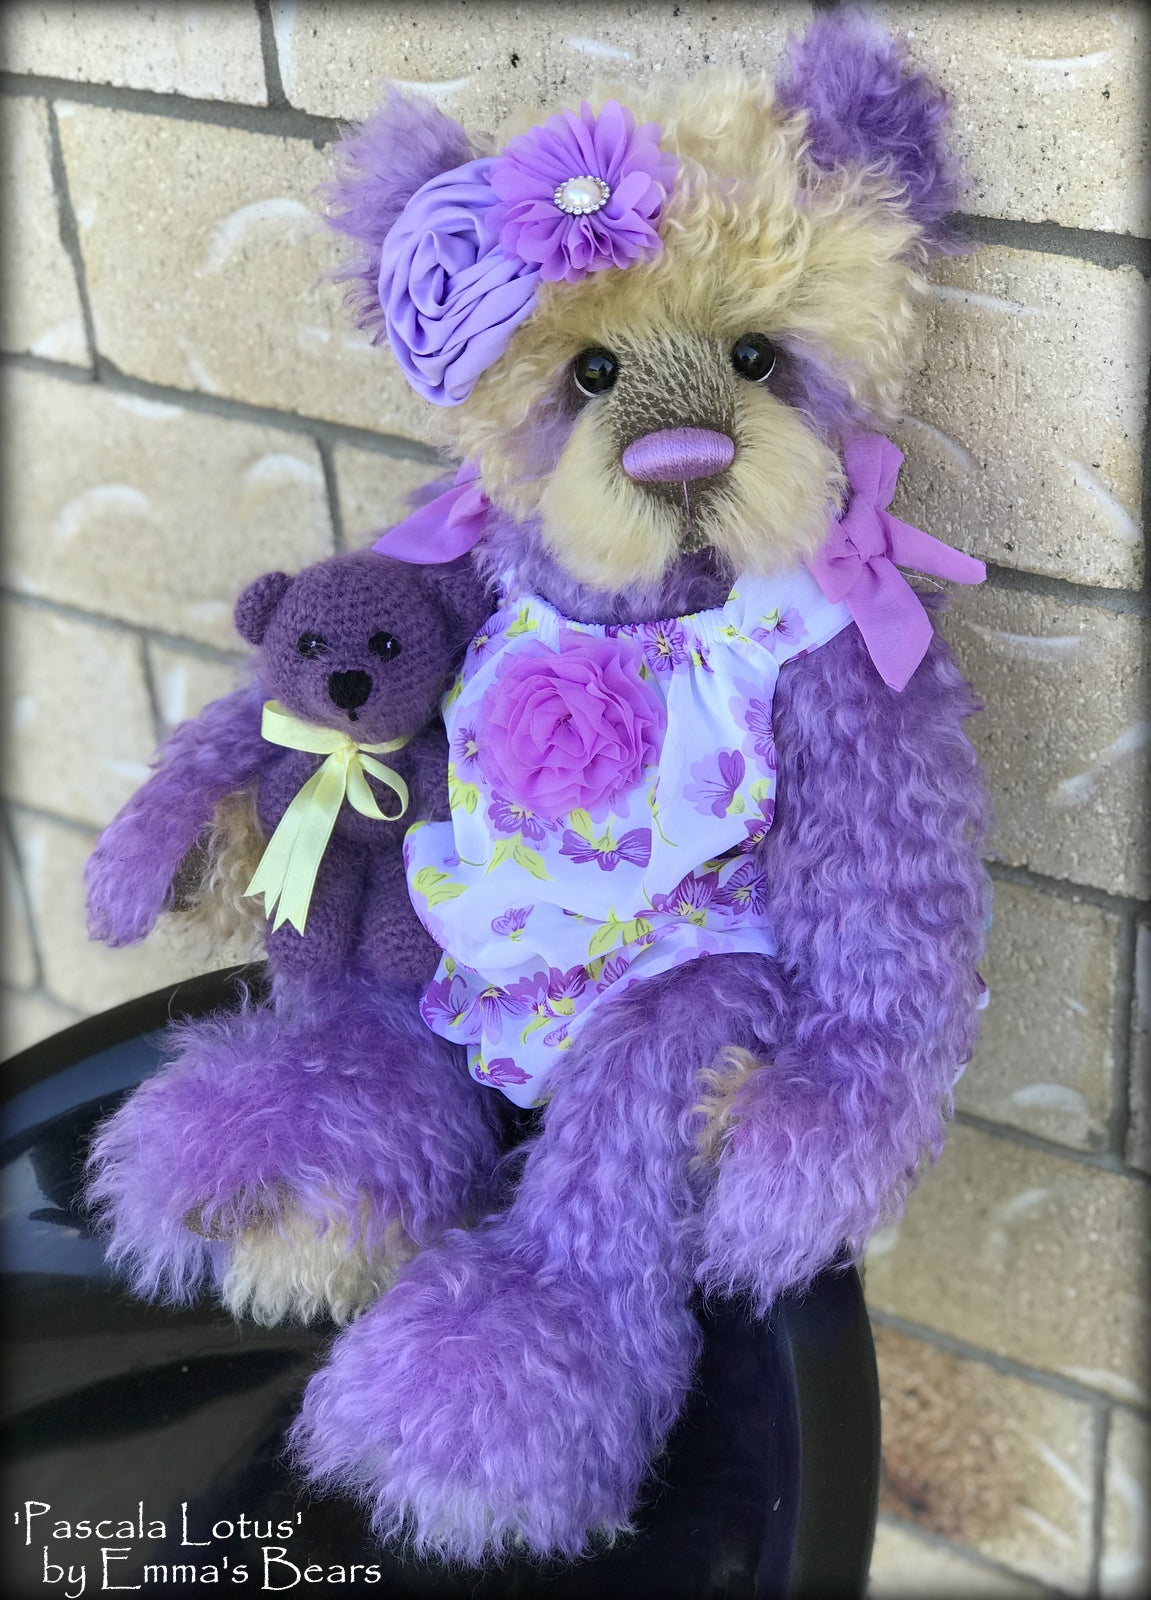 Toddler Pascala Lotus - 21in hand dyed mohair Artist toddler style Bear by Emma's Bears - OOAK